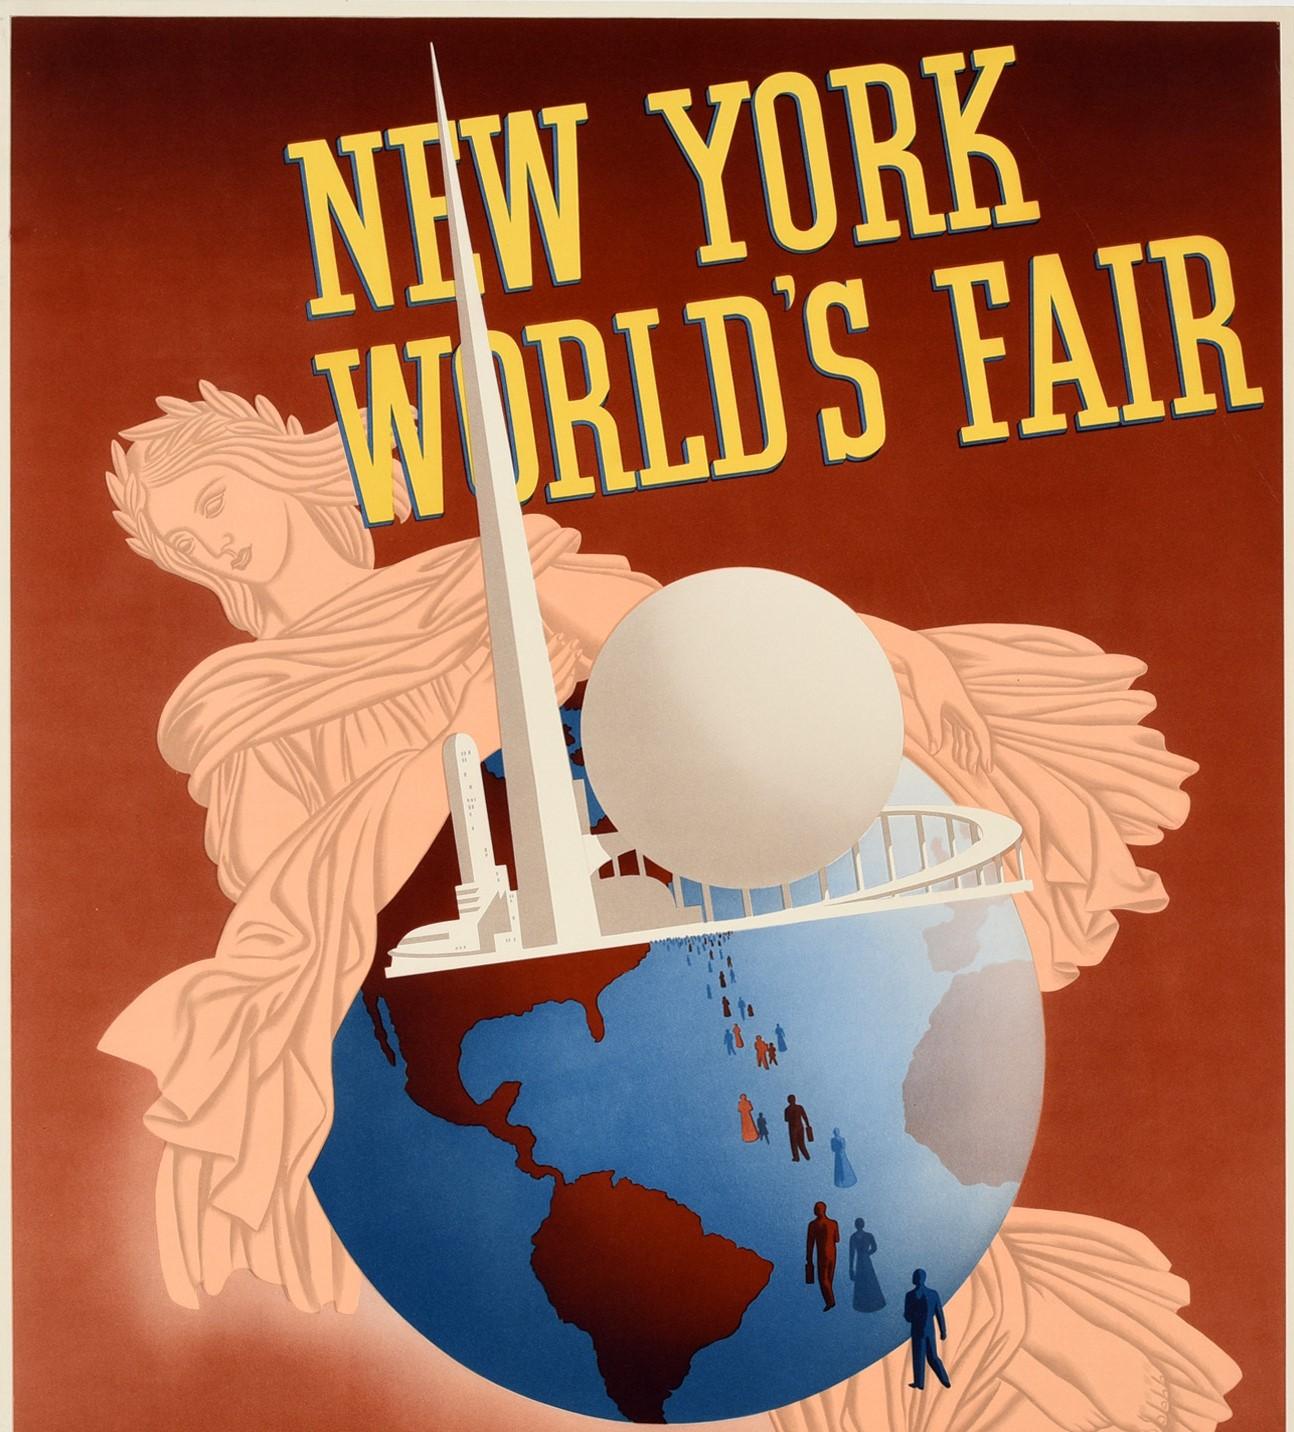 Original vintage travel advertising poster for the World Fair event held in New York at the Flushing Meadows Corona Park from 30 April 1939 to 31 October 1940. Great Art Deco design by John Atherton (1900-1952) featuring people walking towards the